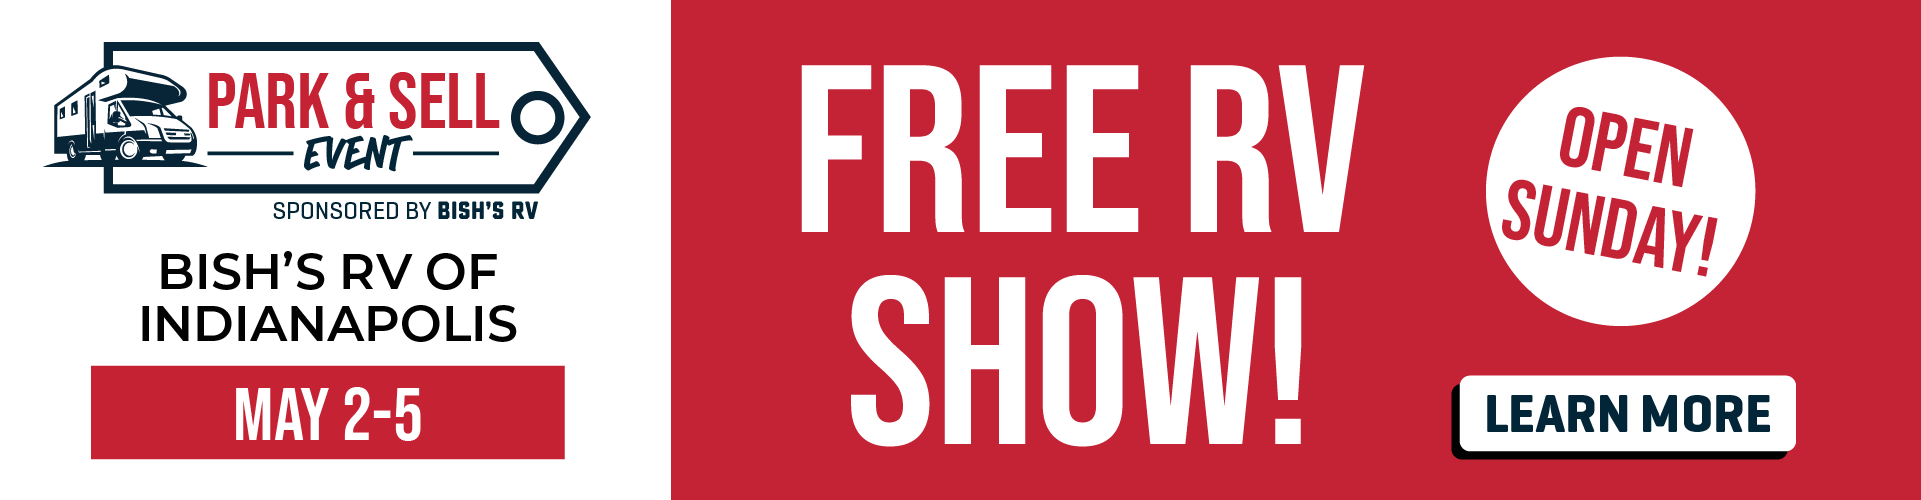 Free RV Show - RV Park & Sell Event - May 2-5 - Bish's RV of Anderson